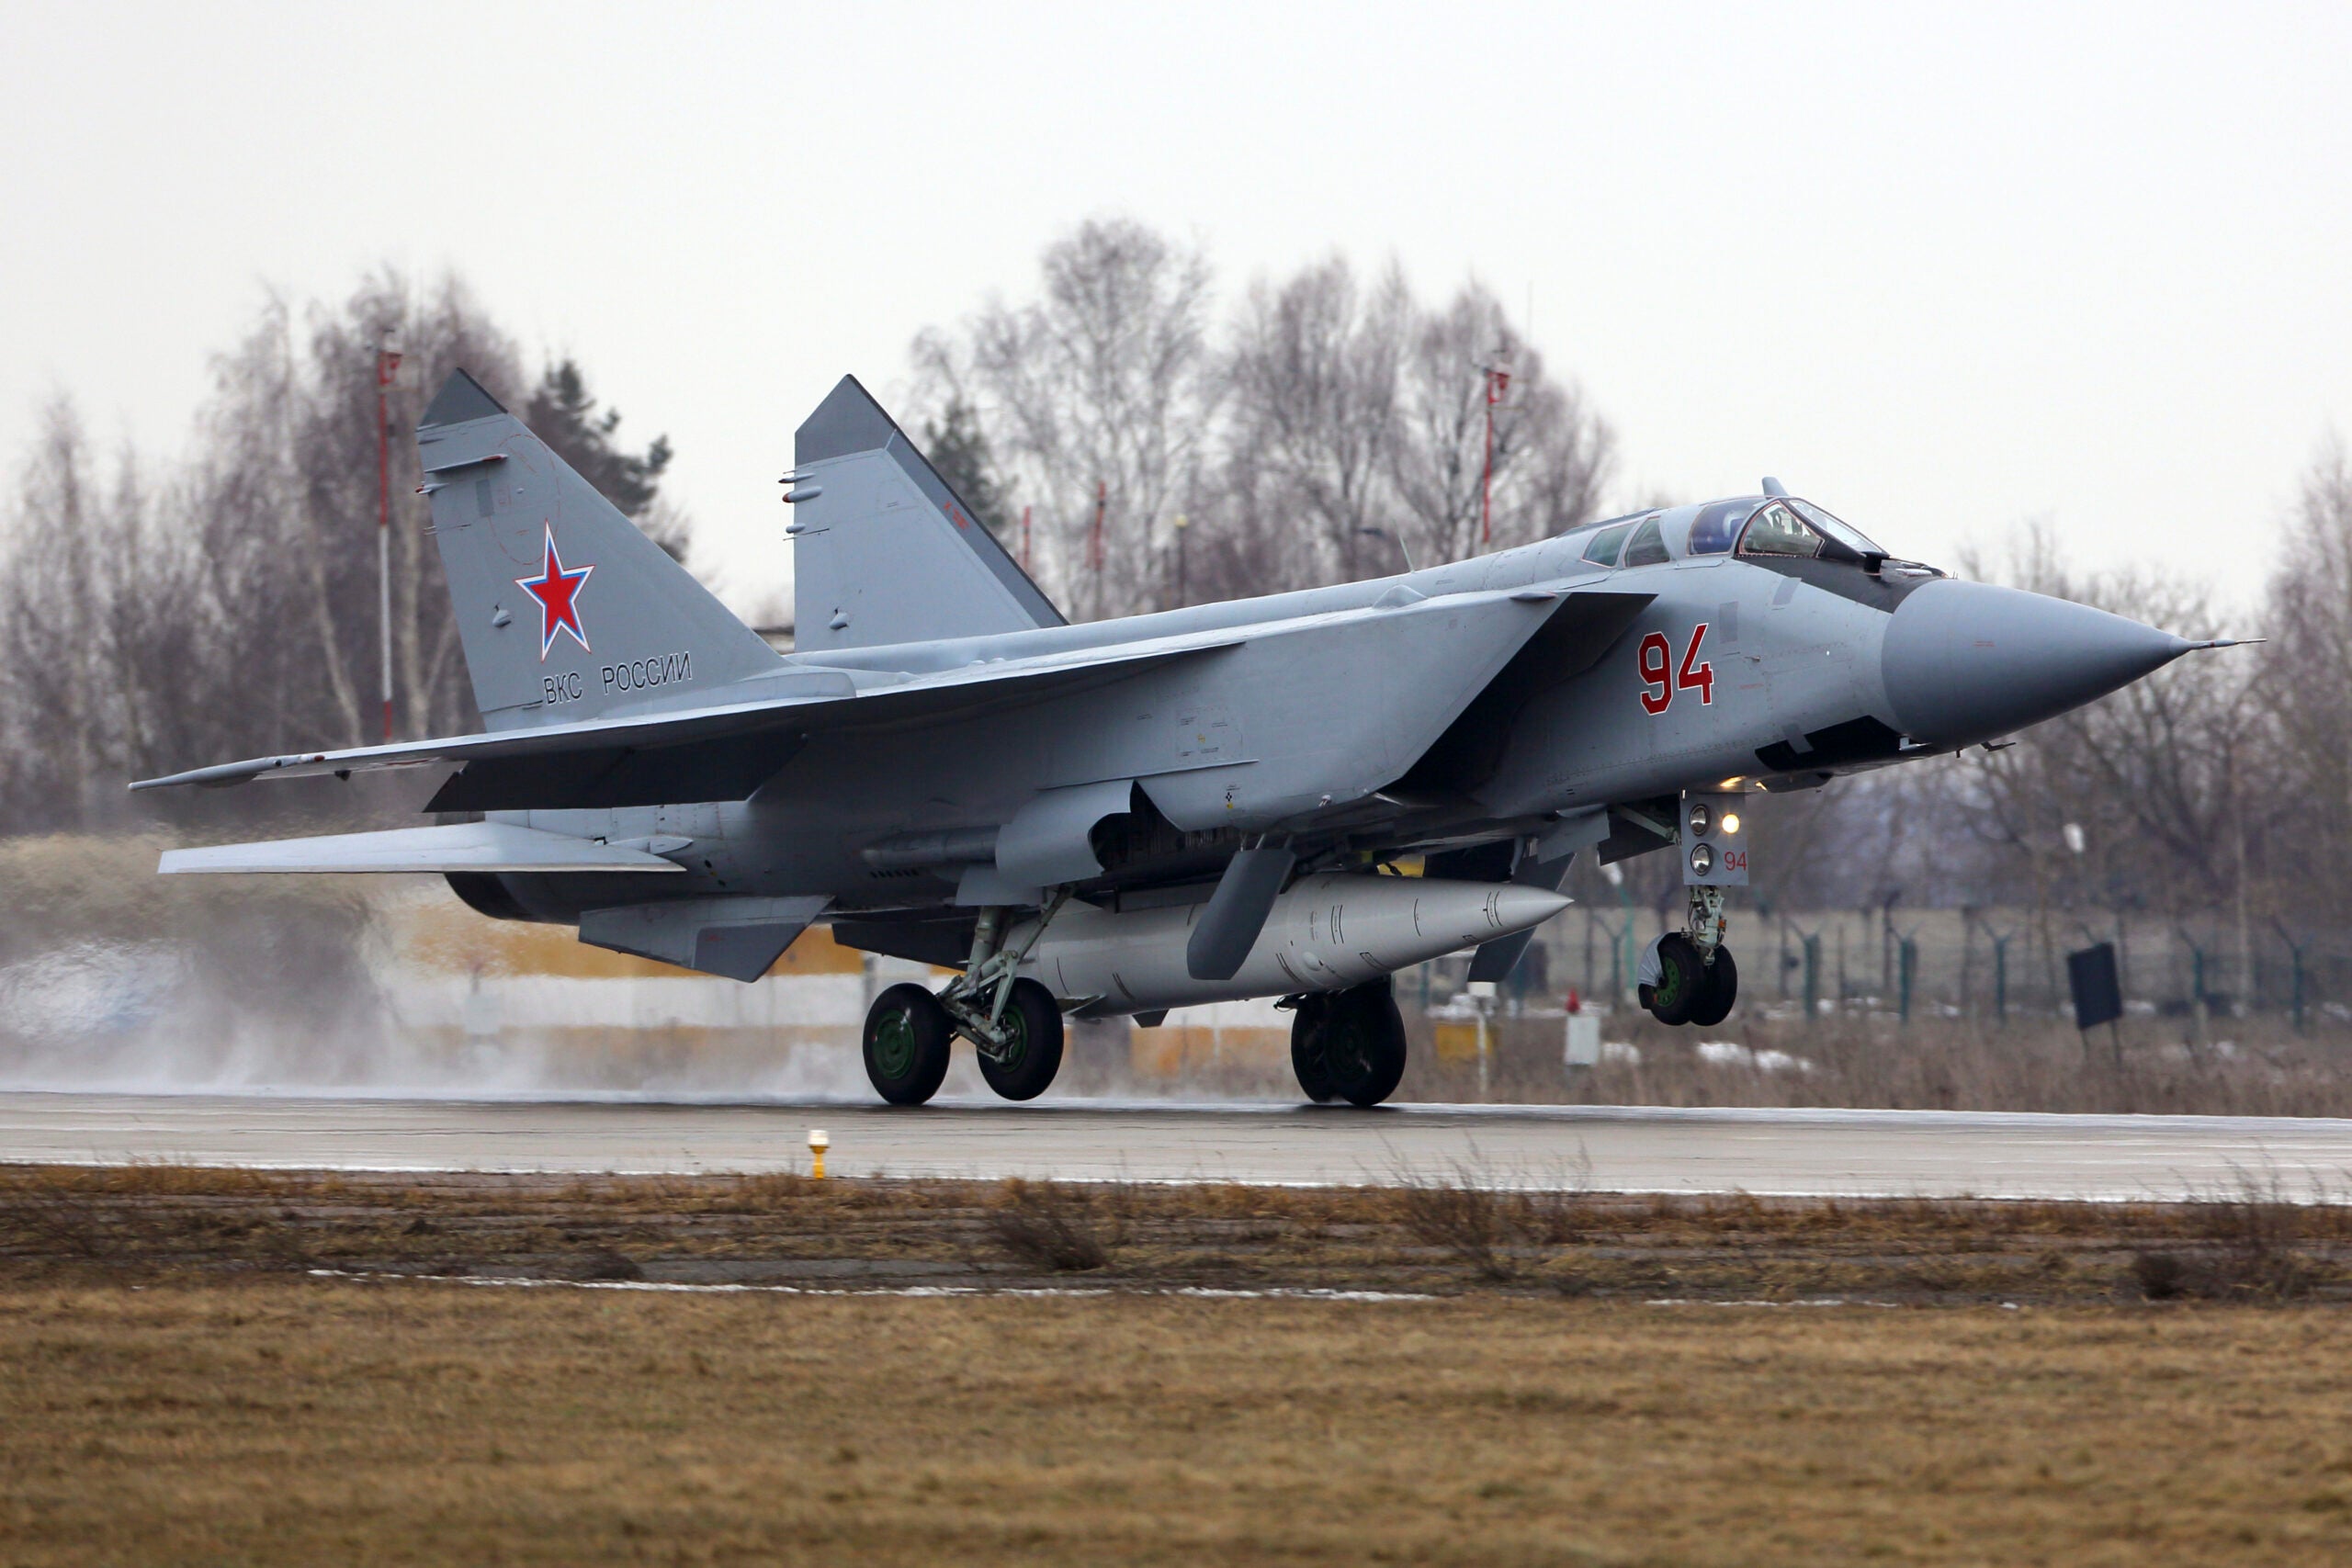 MiG-31K attack aircraft of the Russian Air Force with Kinzhal missile landing, Zhukovsky, Russia.